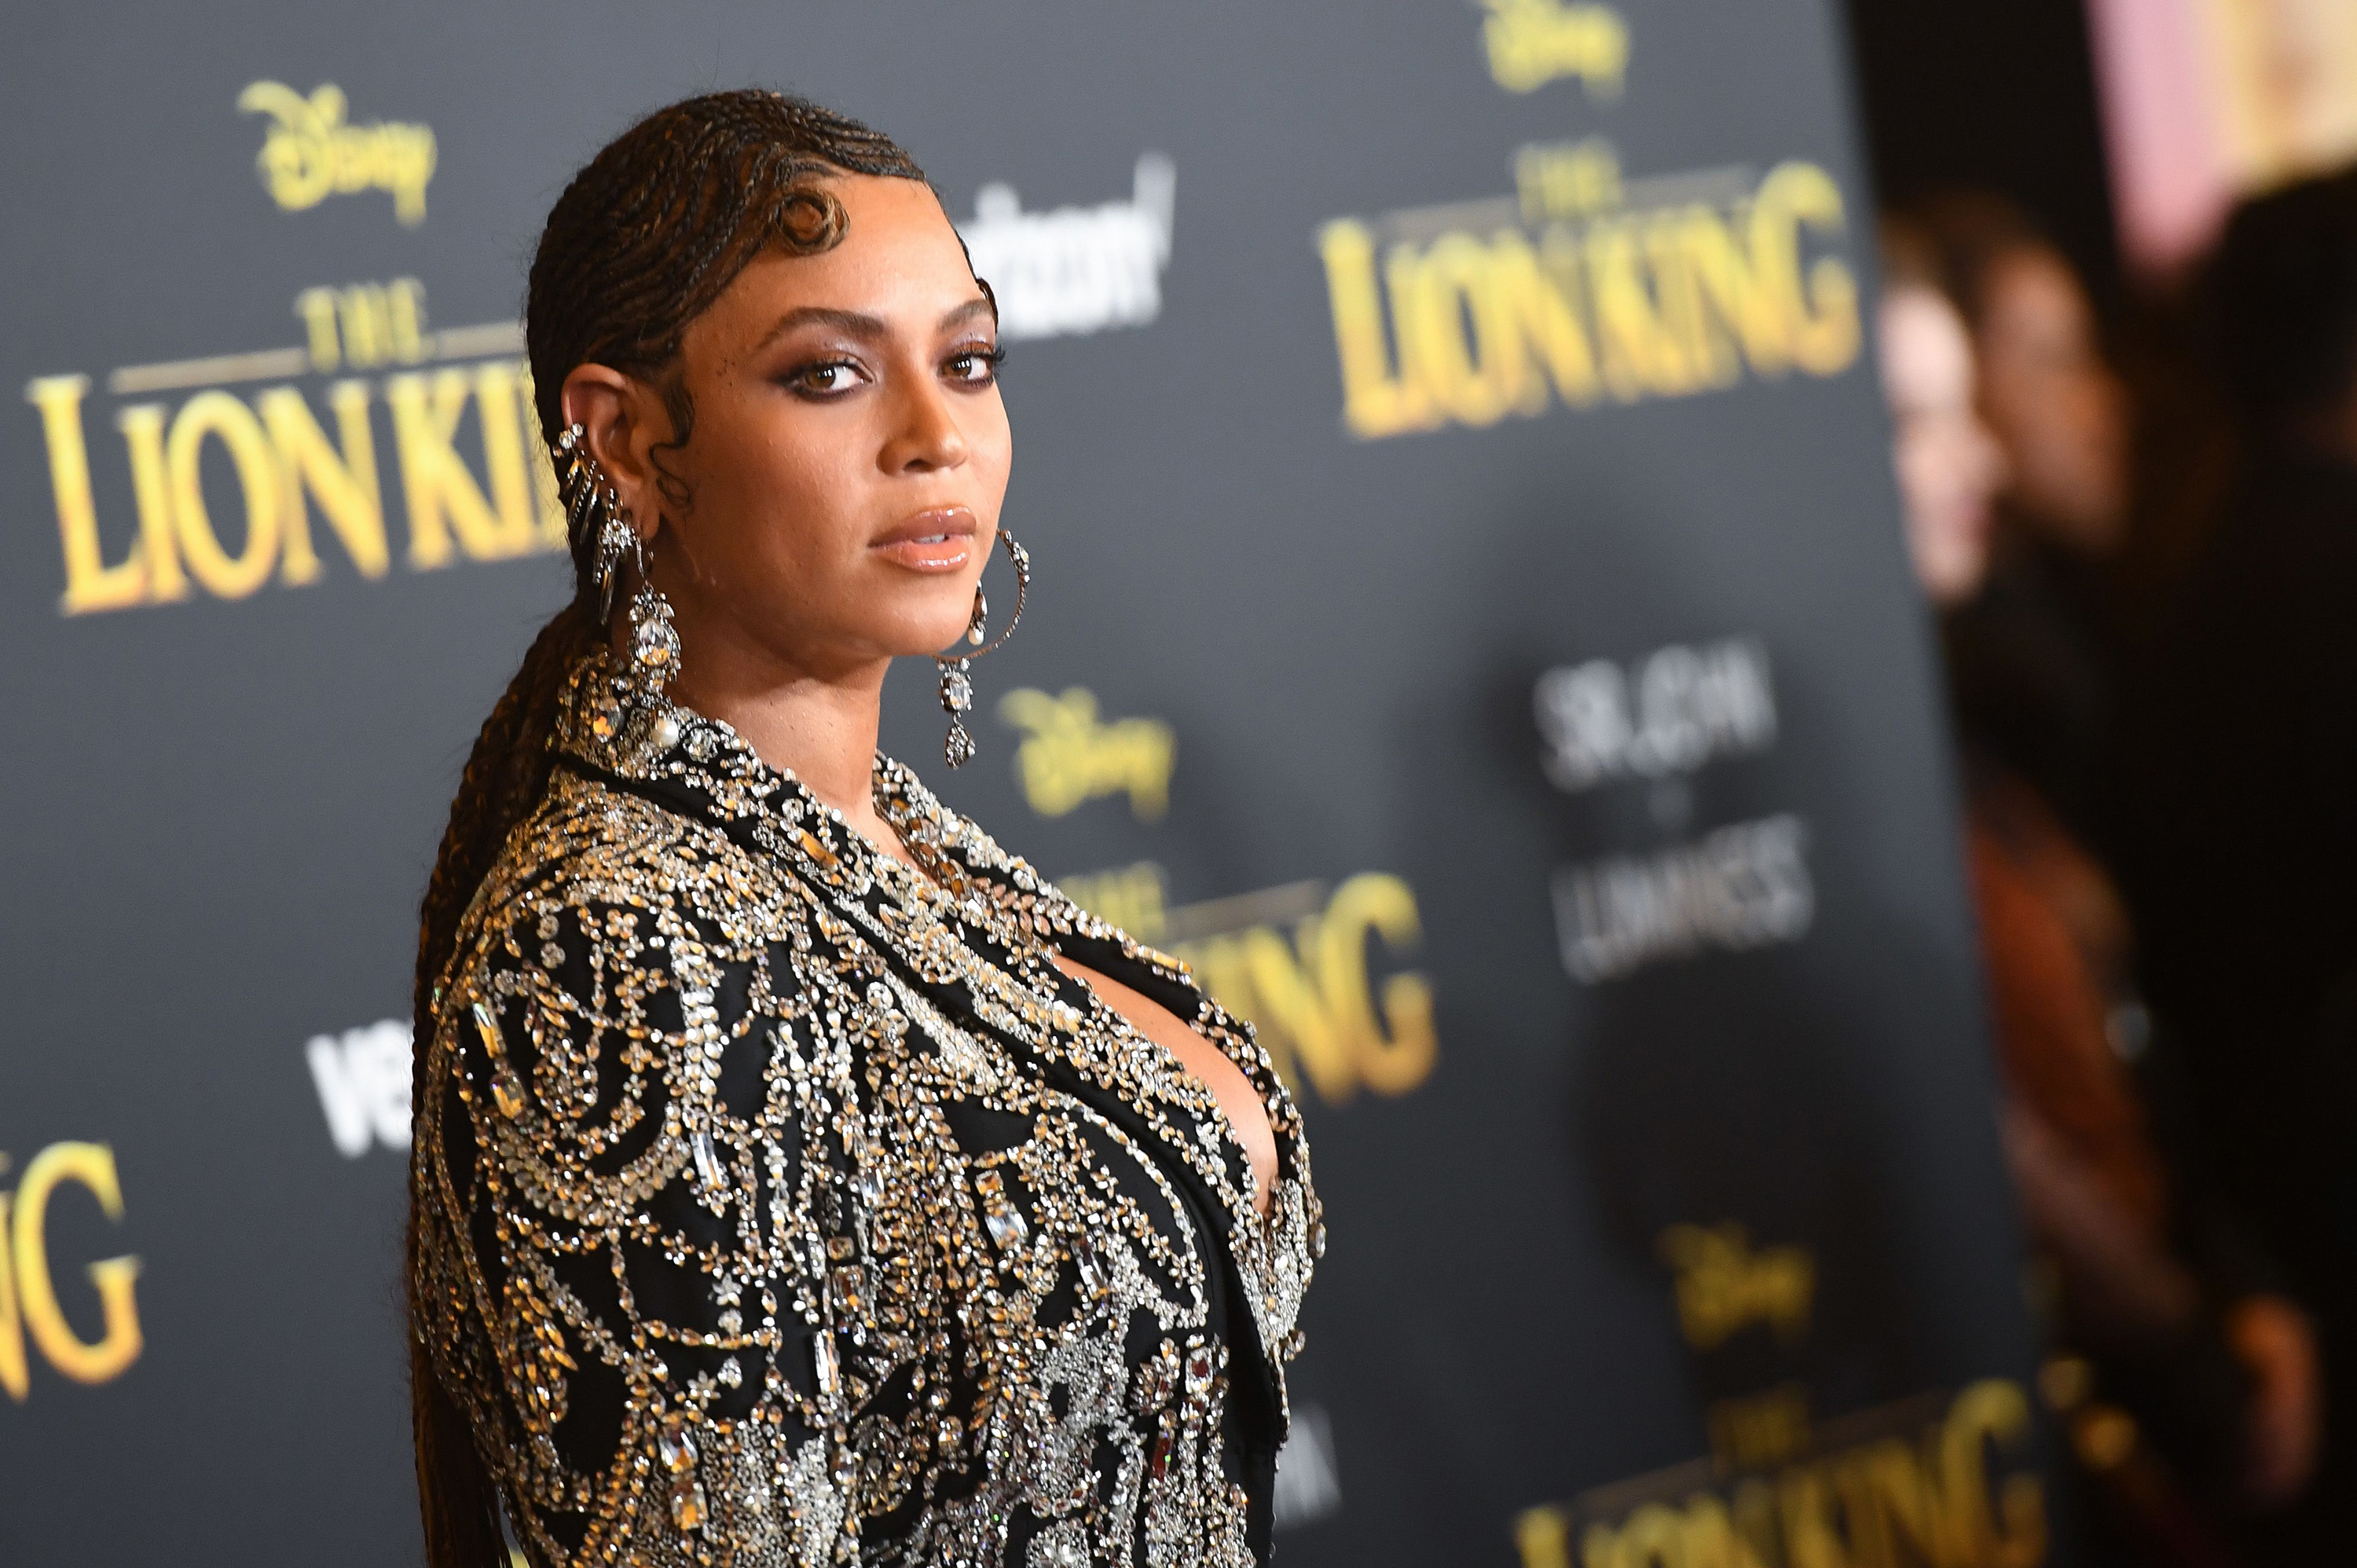 Beyonce at The Lion King premiere in Hollywood.